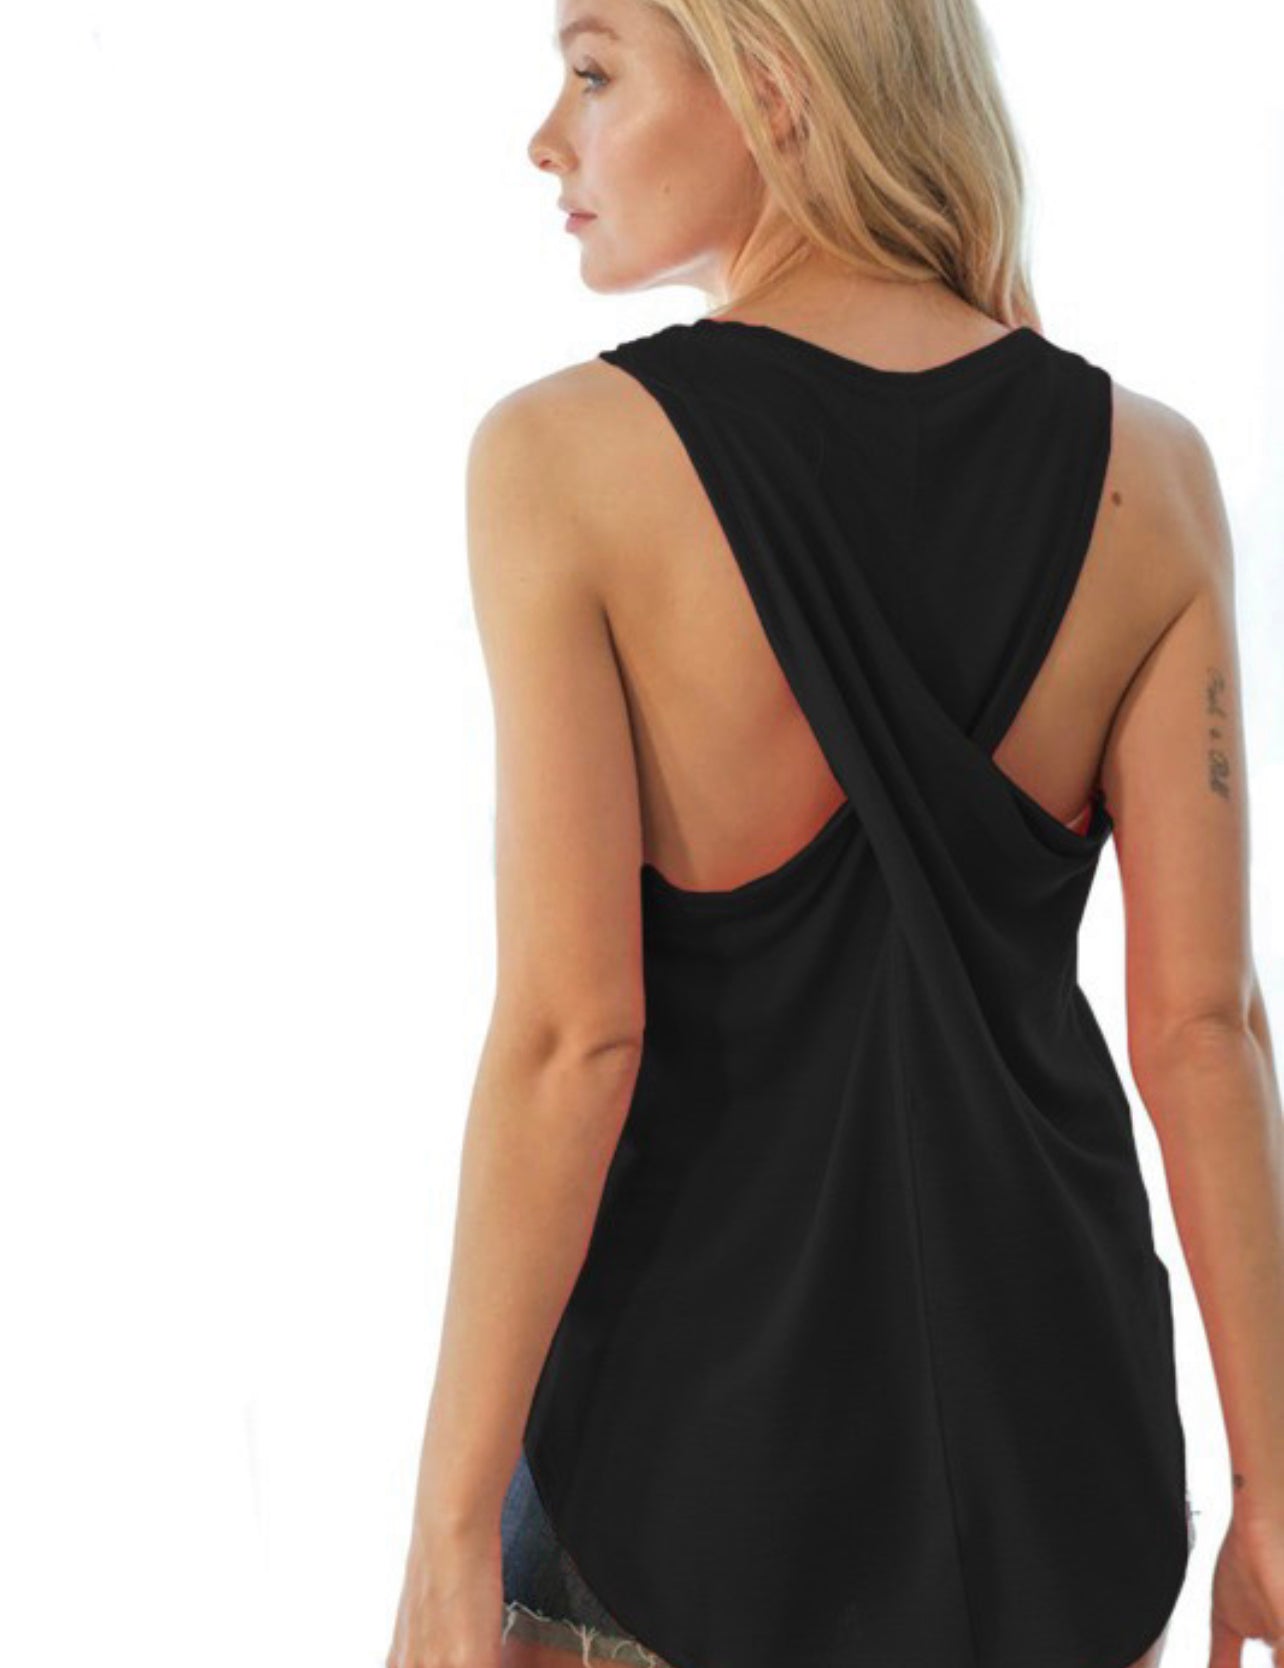 “Sleeveless top with back cross details”